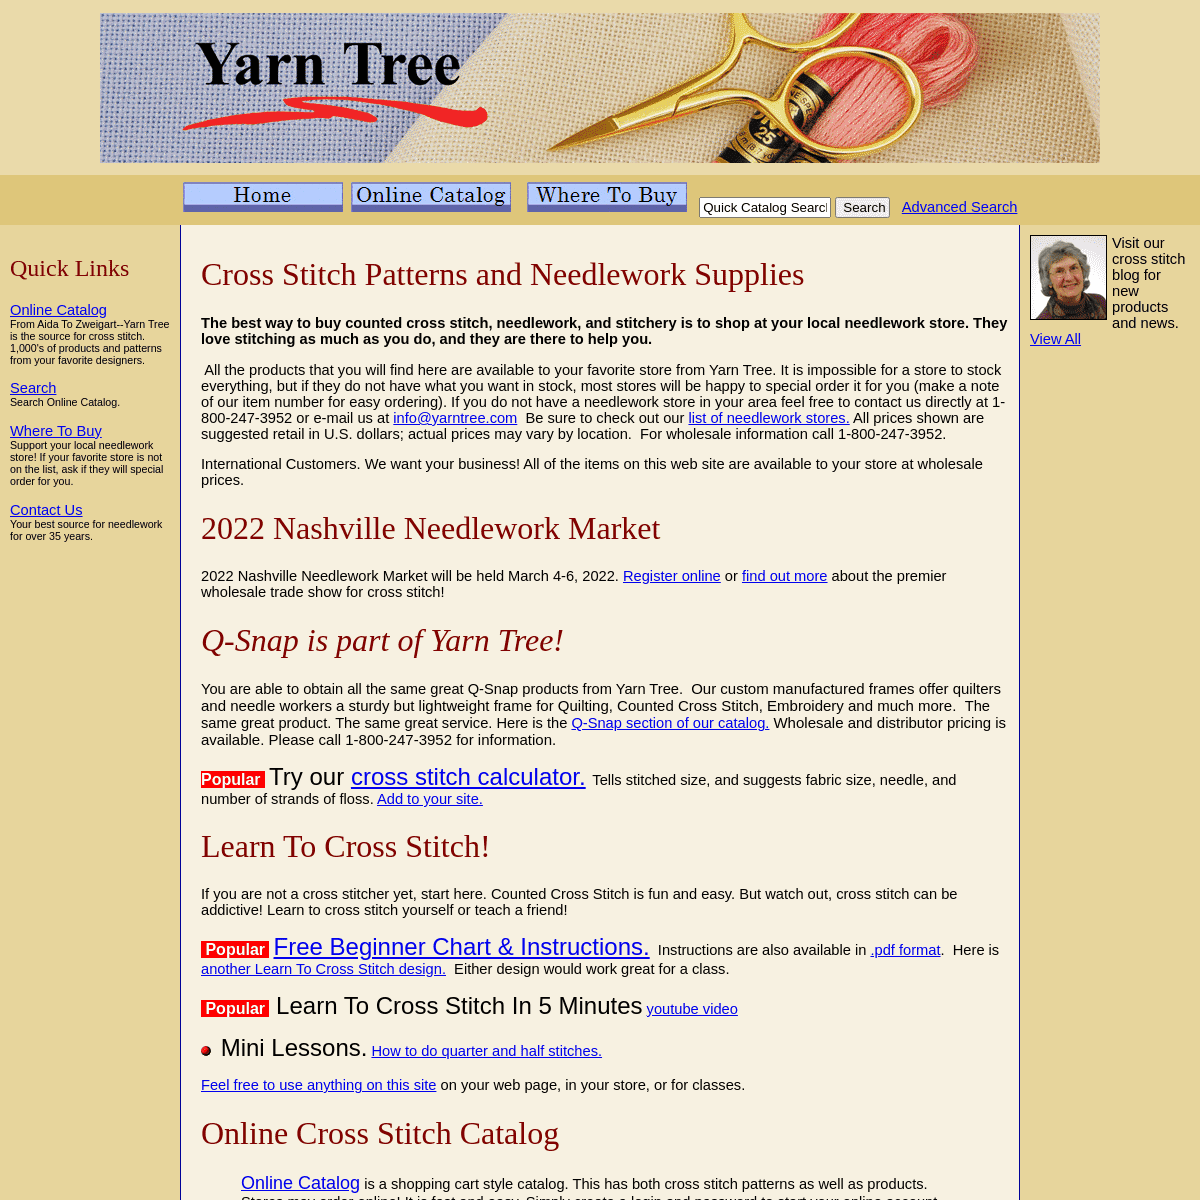 A complete backup of https://yarntree.com